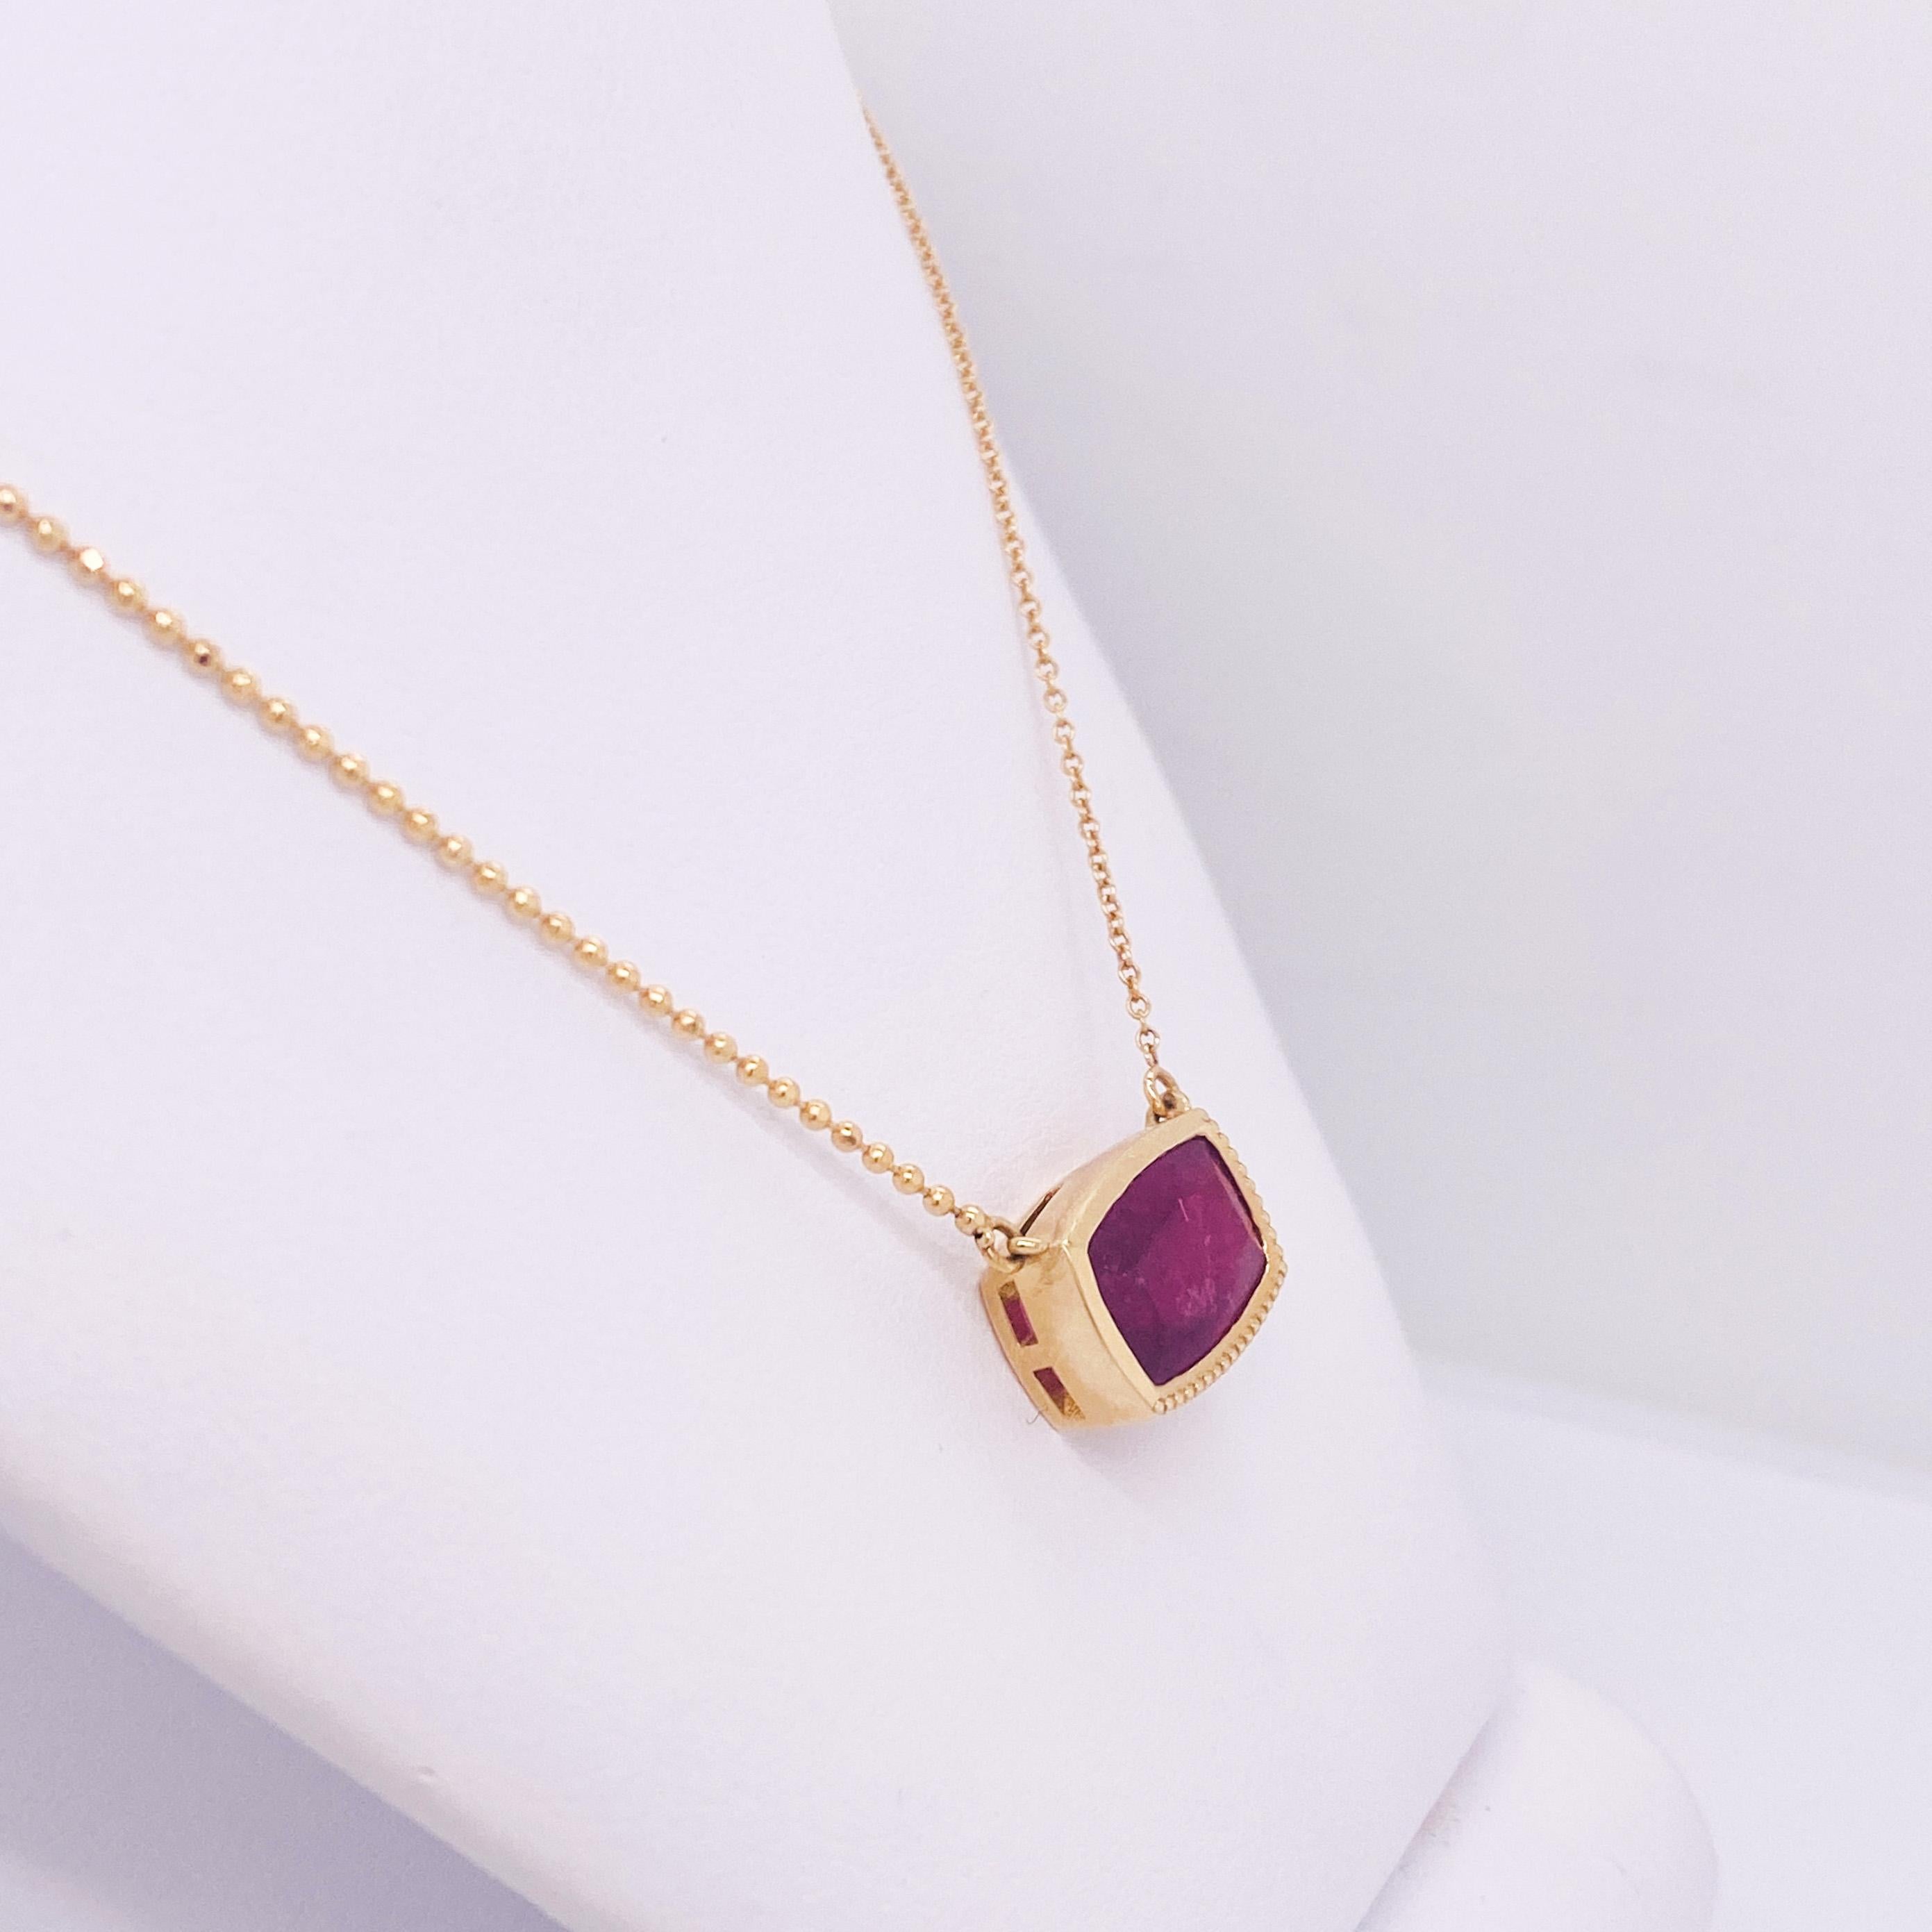 Modern Fuchsia Pink Tourmaline Necklace with Asymmetric Details in 14K Yellow Gold LV For Sale